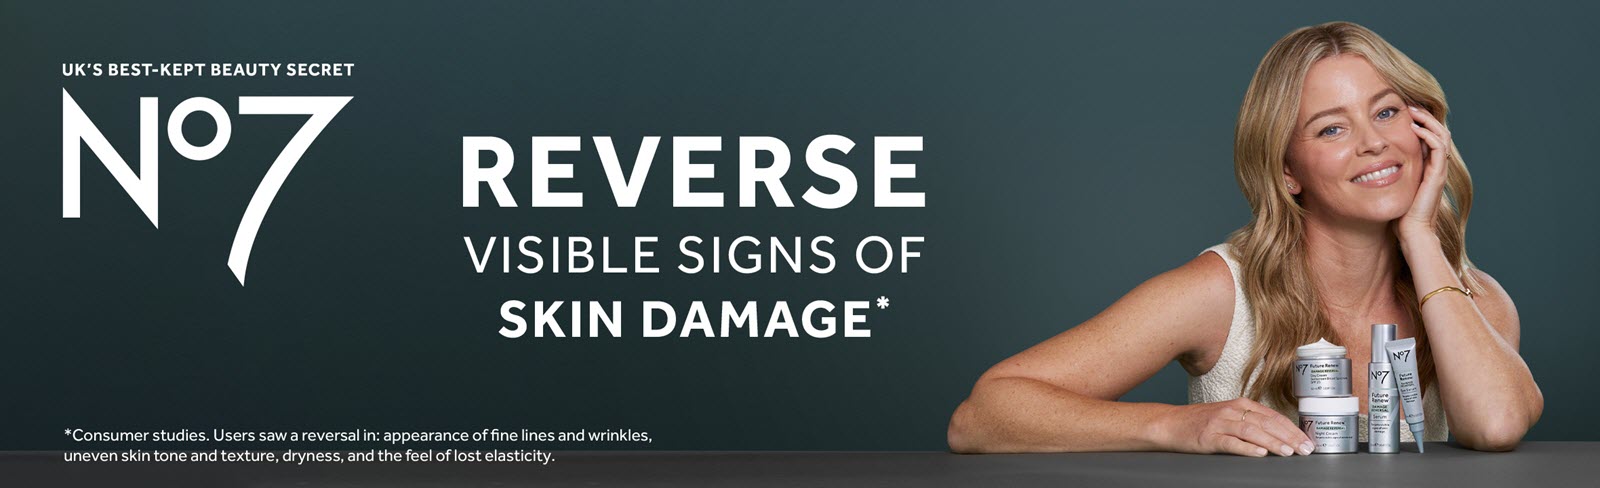 UK's best-kept beauty secret No7. Reverse visible signs of skin damage. *Consumer studies. Users saw a reversal in: appearance of fine lines & wrinkles, uneven skin tone & texture, dryness, & the feel of lost elasticity.